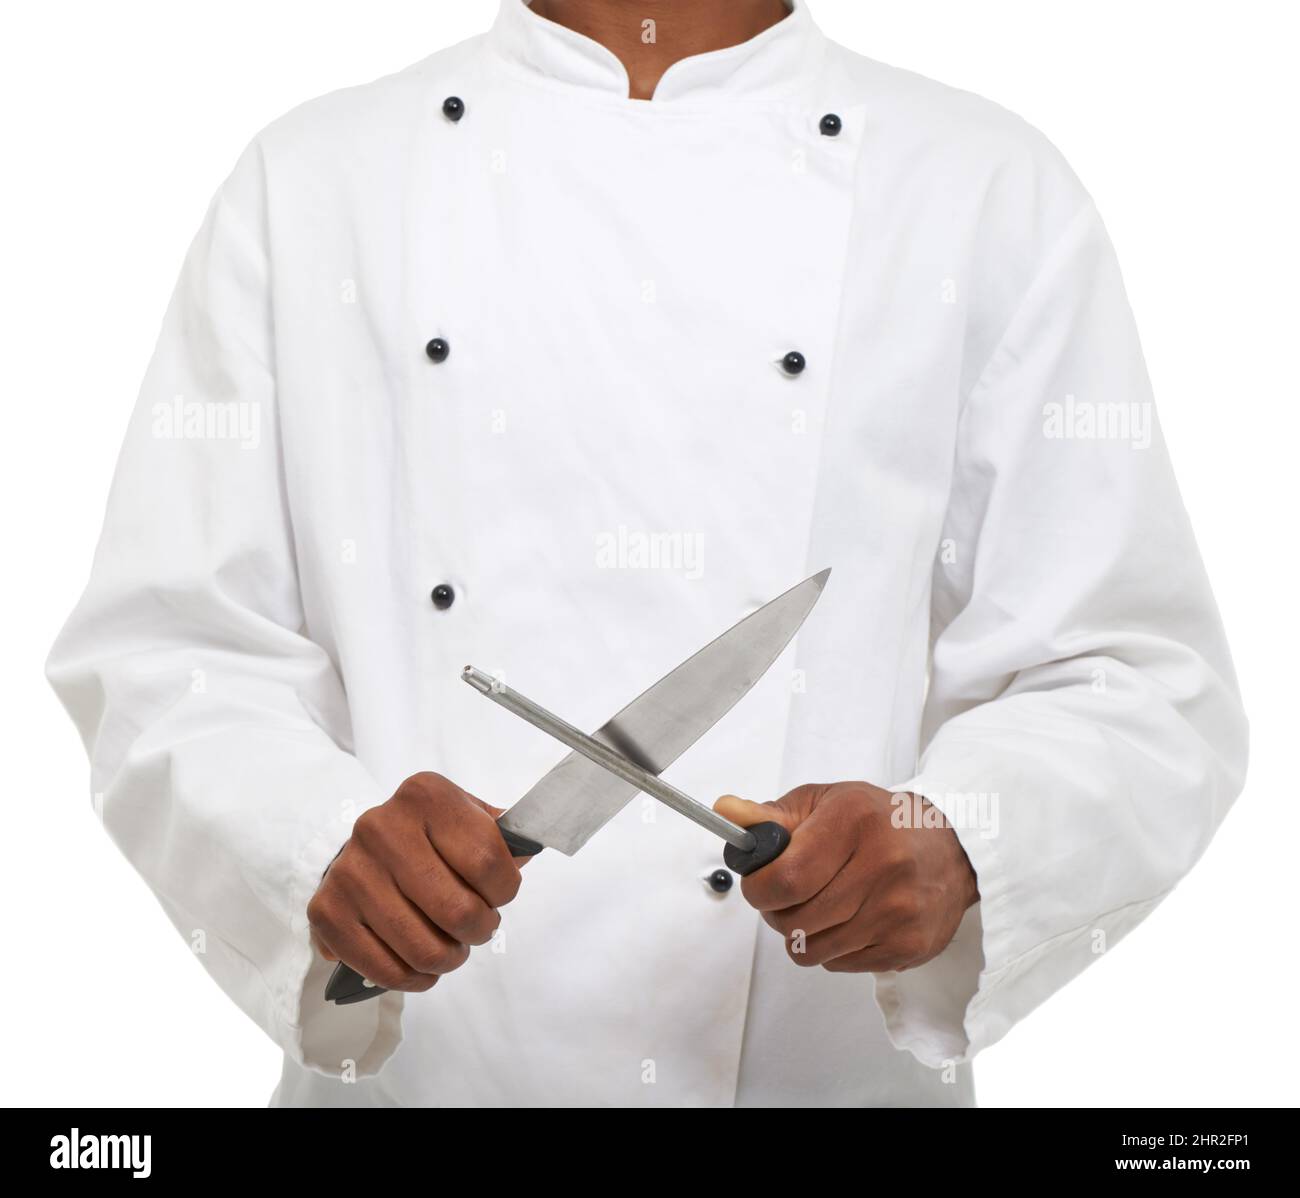 https://c8.alamy.com/comp/2HR2FP1/tools-of-the-trade-a-young-chef-sharpening-his-knives-while-isolated-on-a-white-background-2HR2FP1.jpg